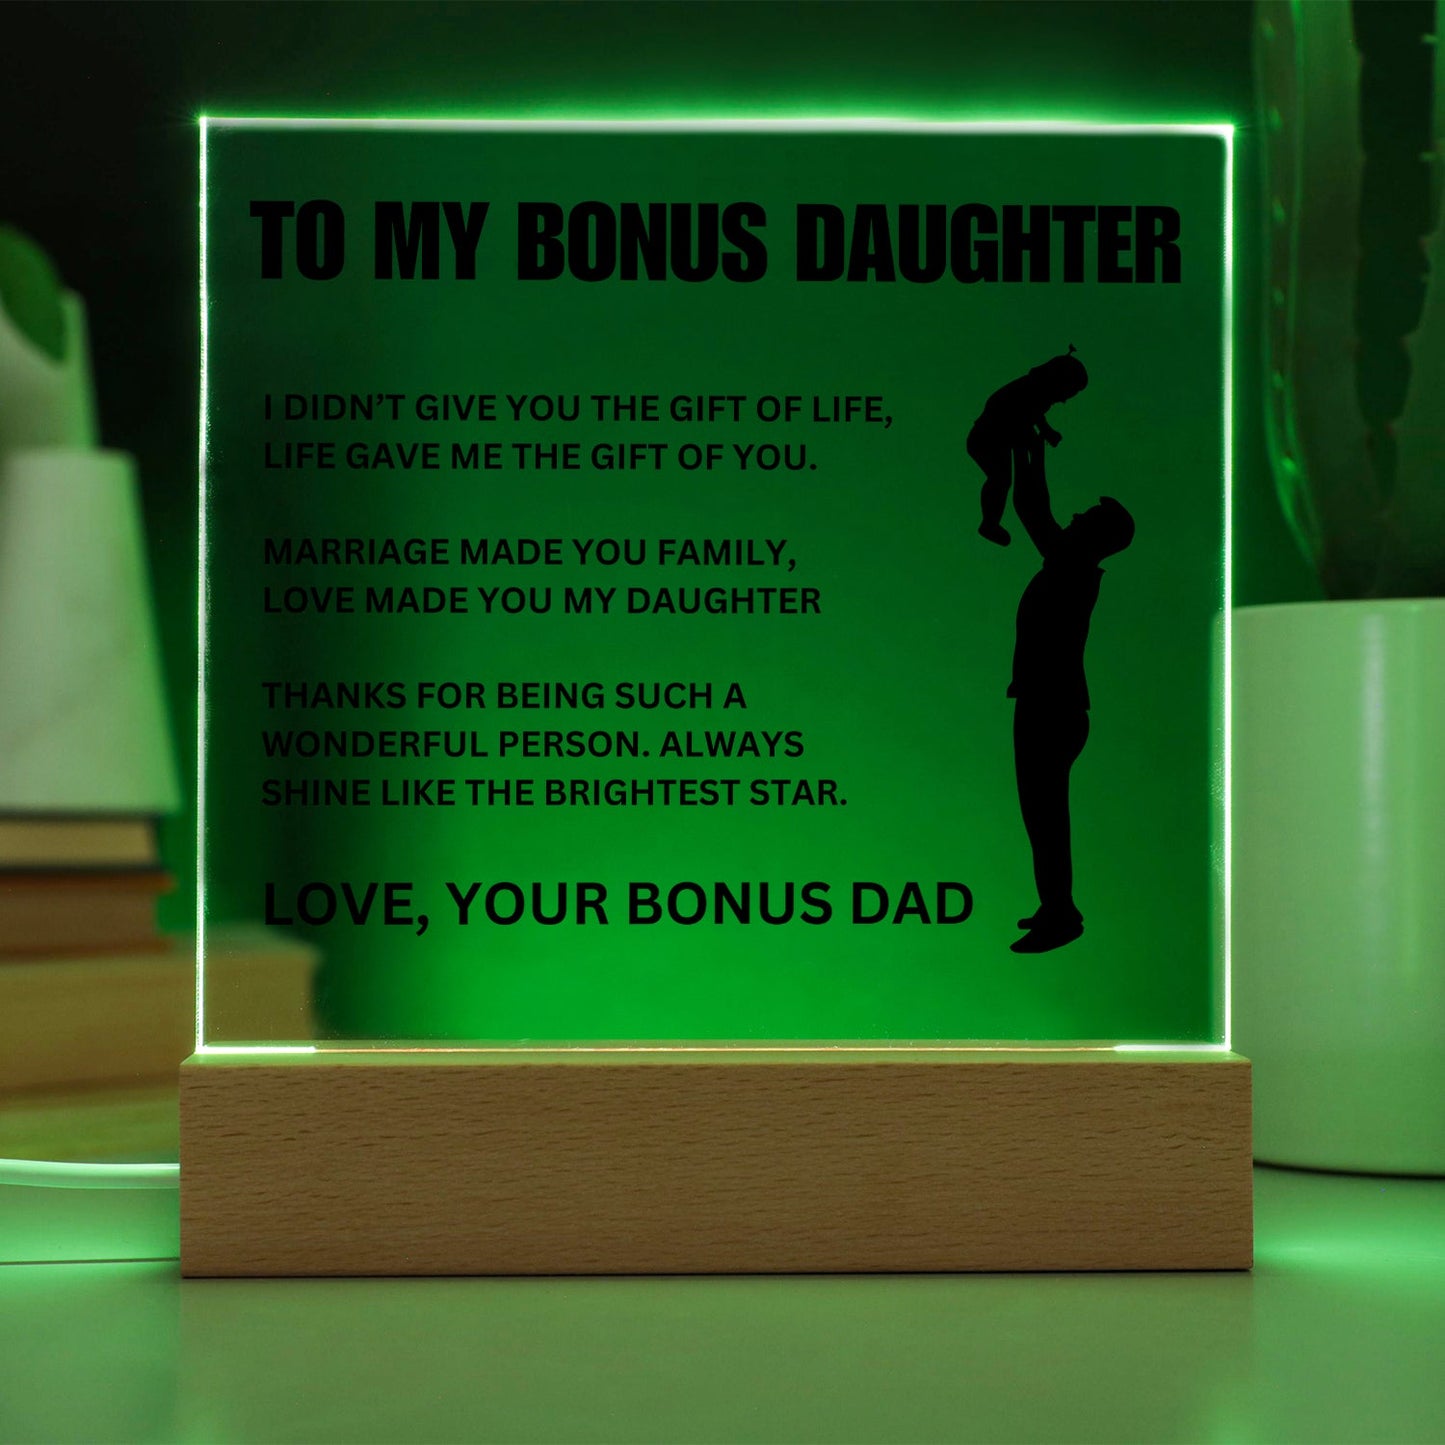 To My Bonus Daughter | "Gift of You" | Acrylic LED Lamp